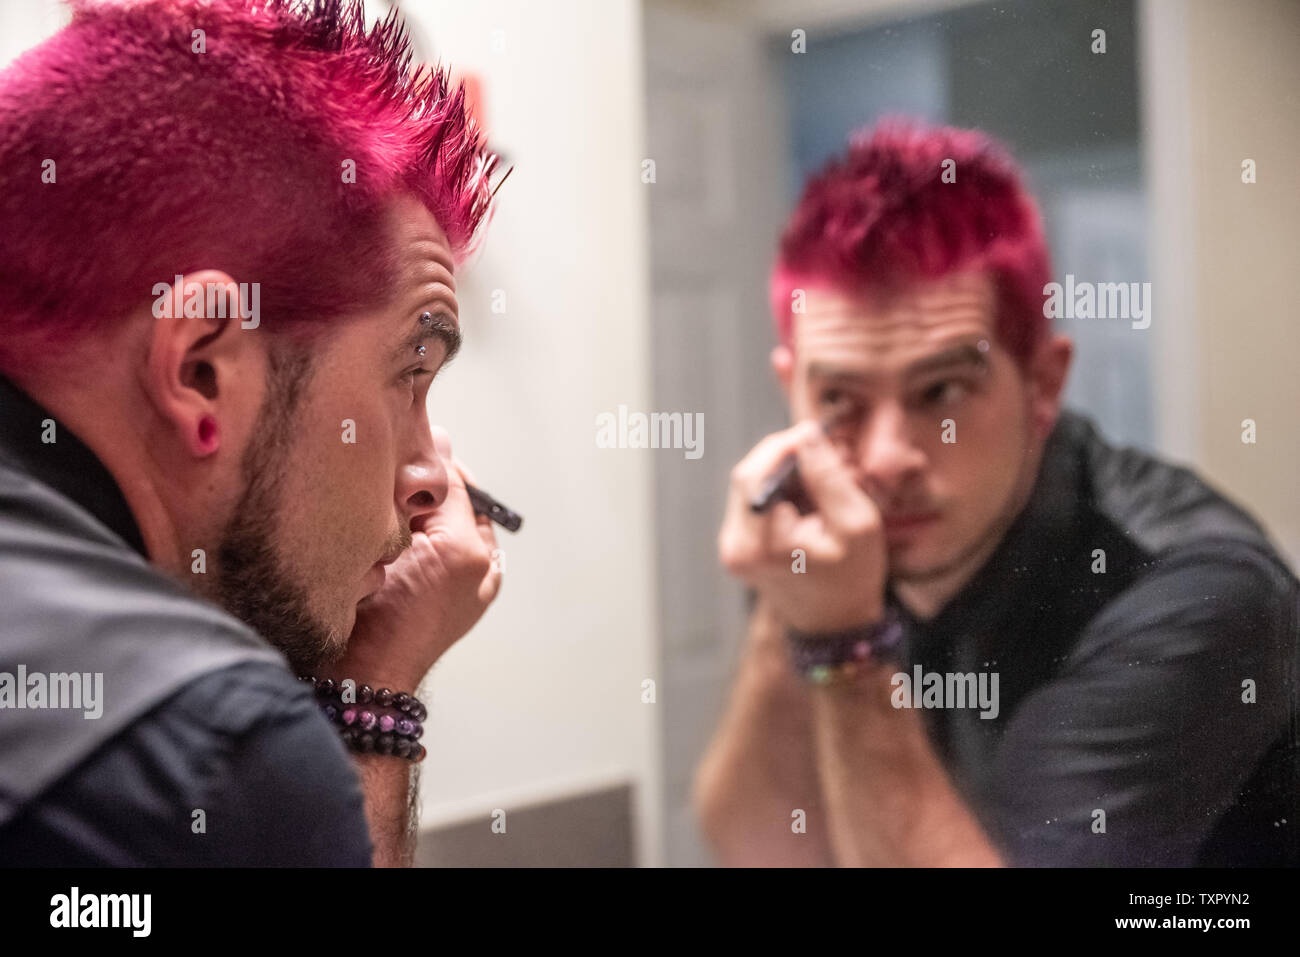 Punk Hairstyles For A Wild Guys To Rock It In 2021  MensHaircutscom